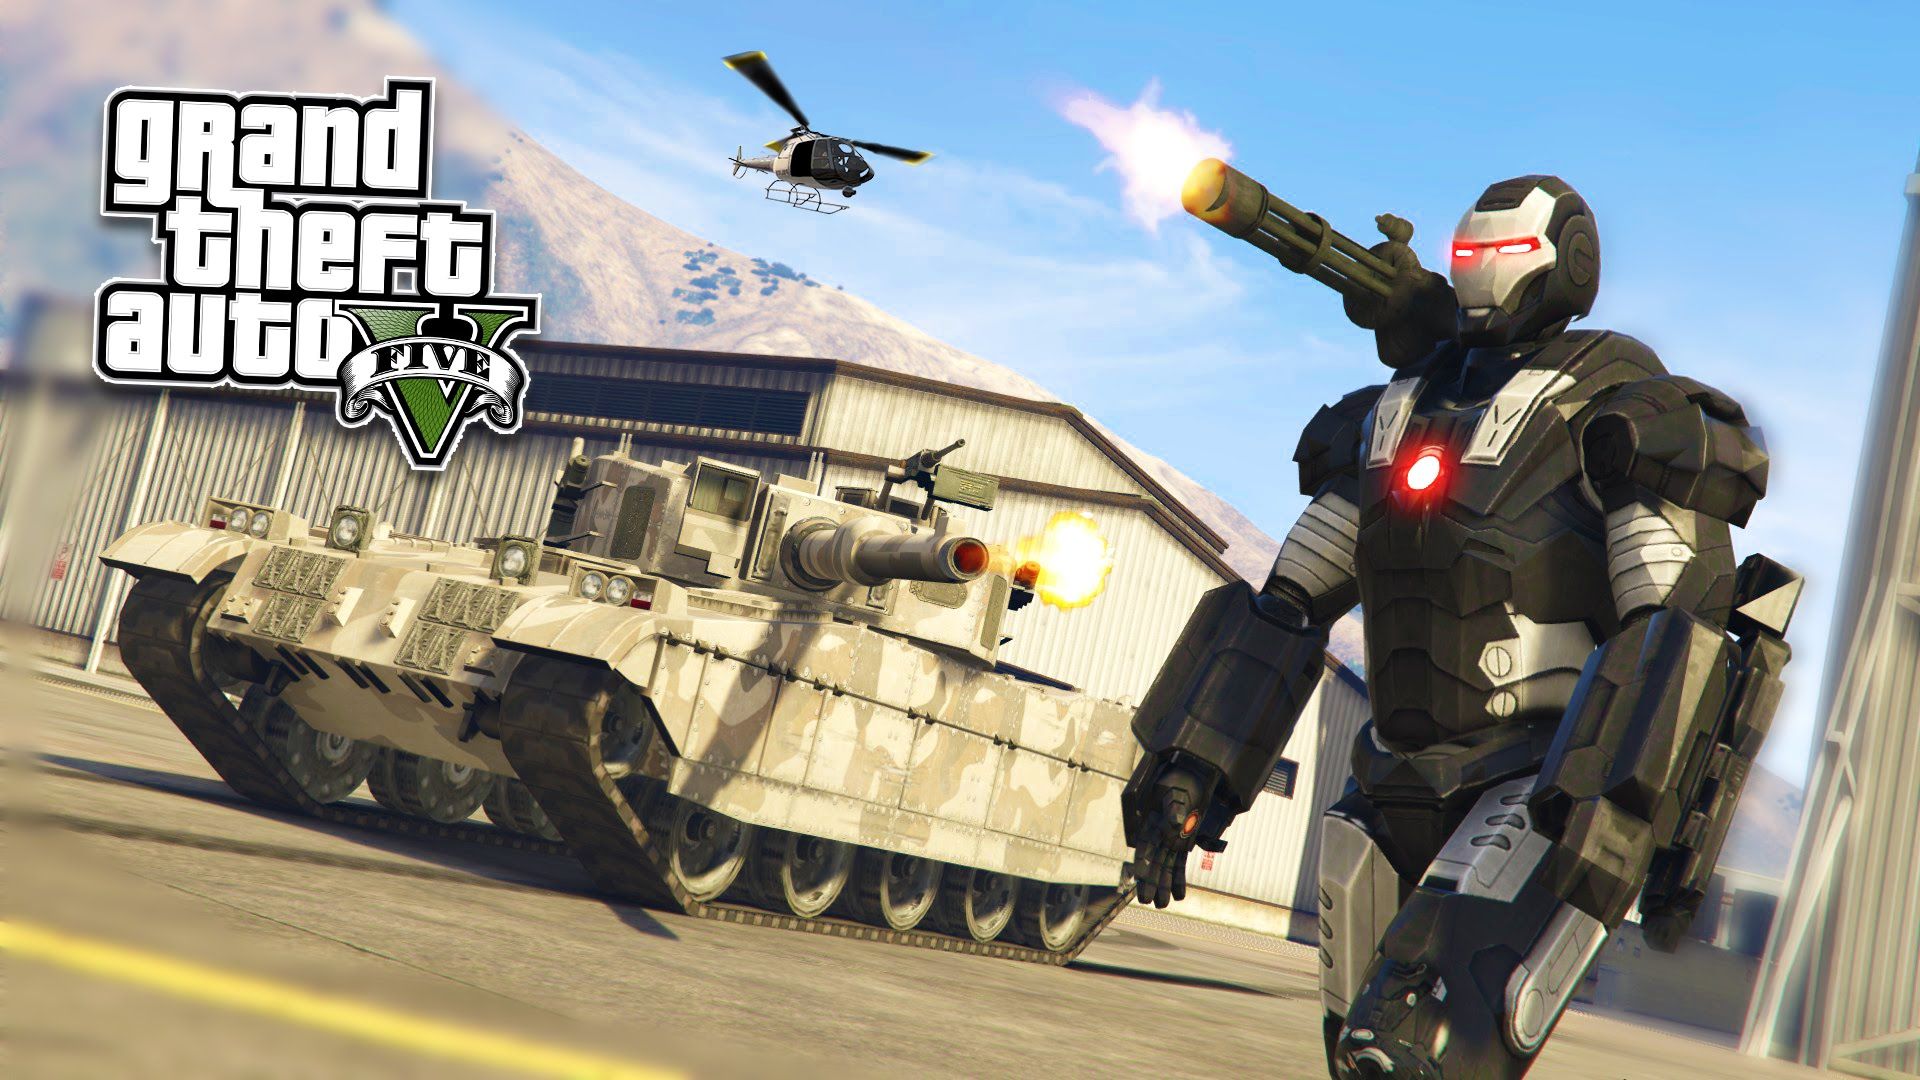 20 Incredible Grand Theft Auto Fan Theories (That Actually Got Confirmed)